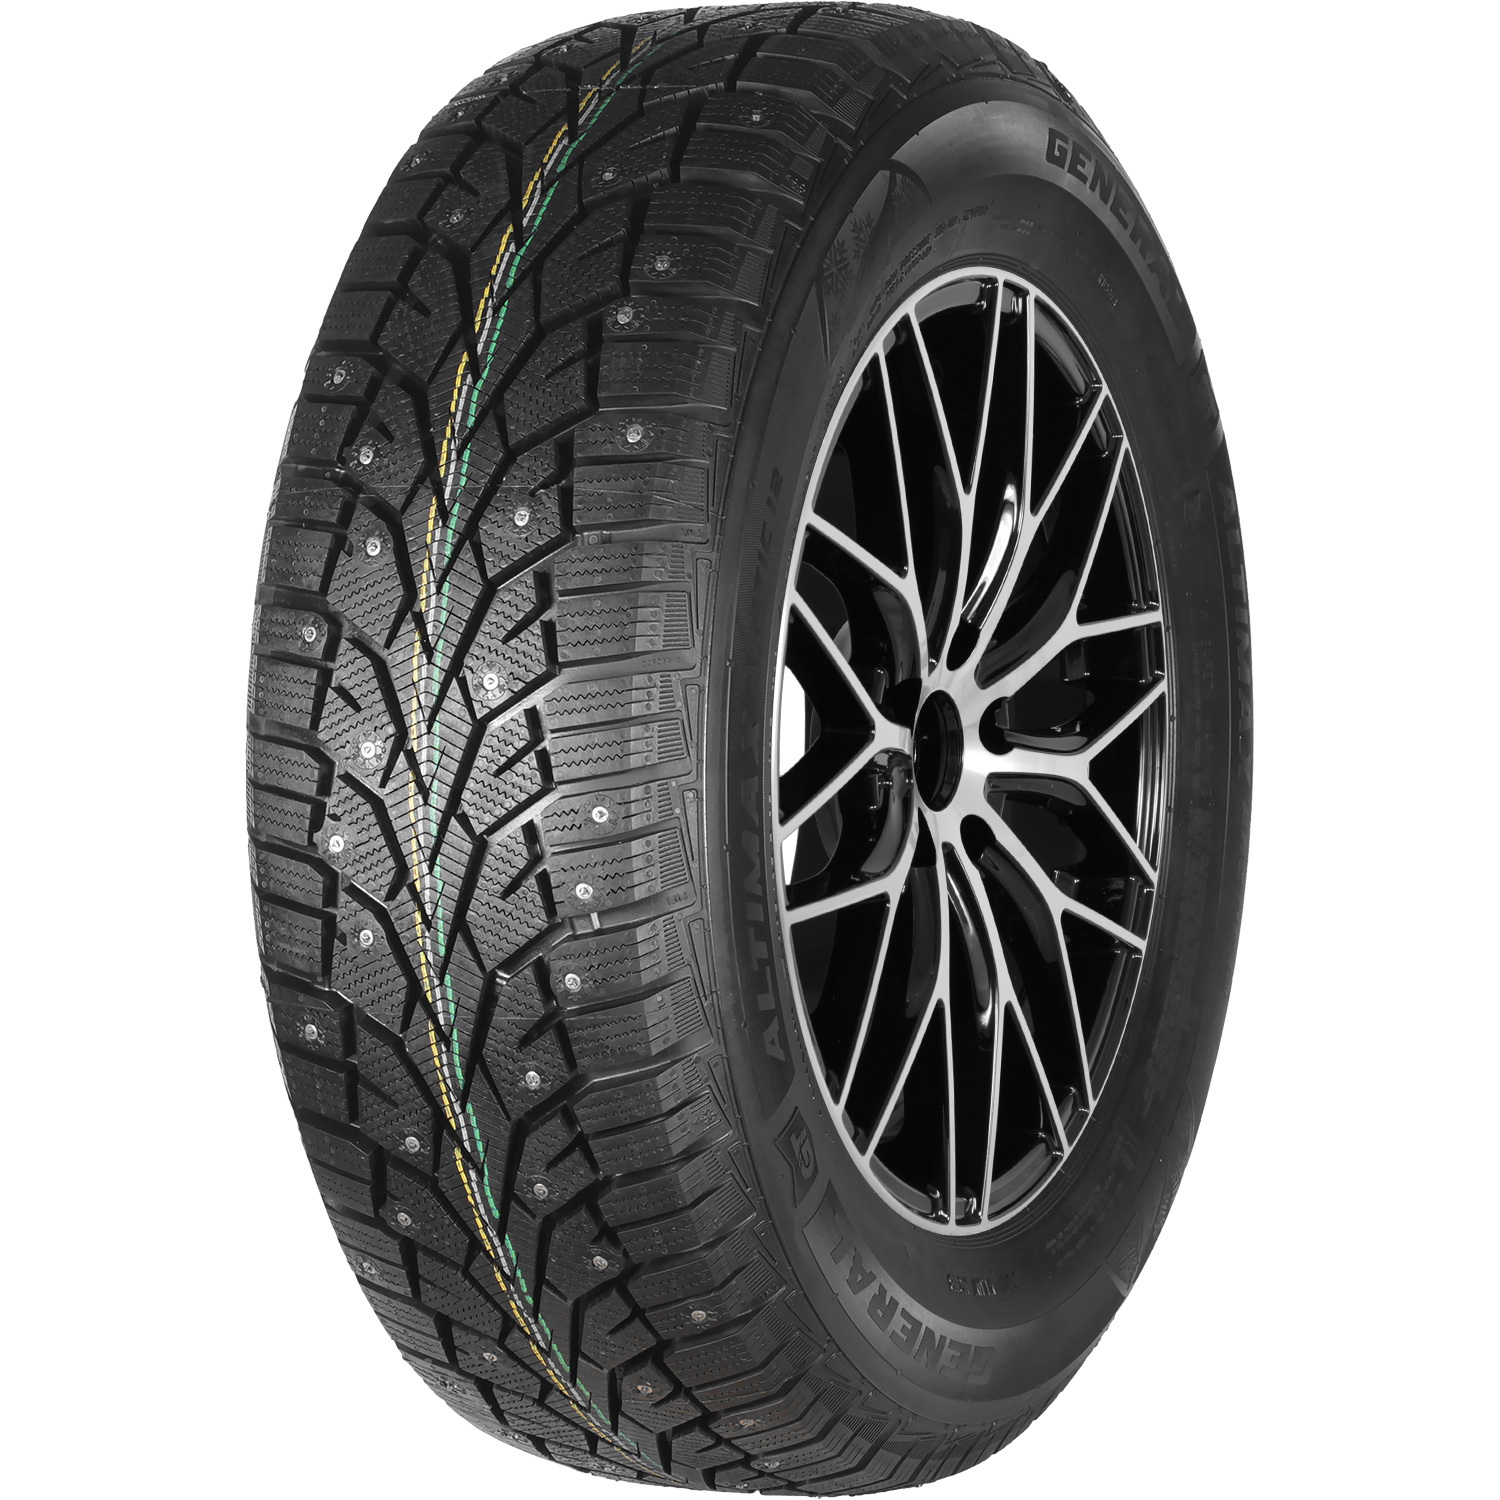 Автомобильная шина General Tire Altimax Arctic 12 175/65 R14 86T Шипованные camping spare tire cover car accessories custom spare tire covers your own personalized design tire protectors